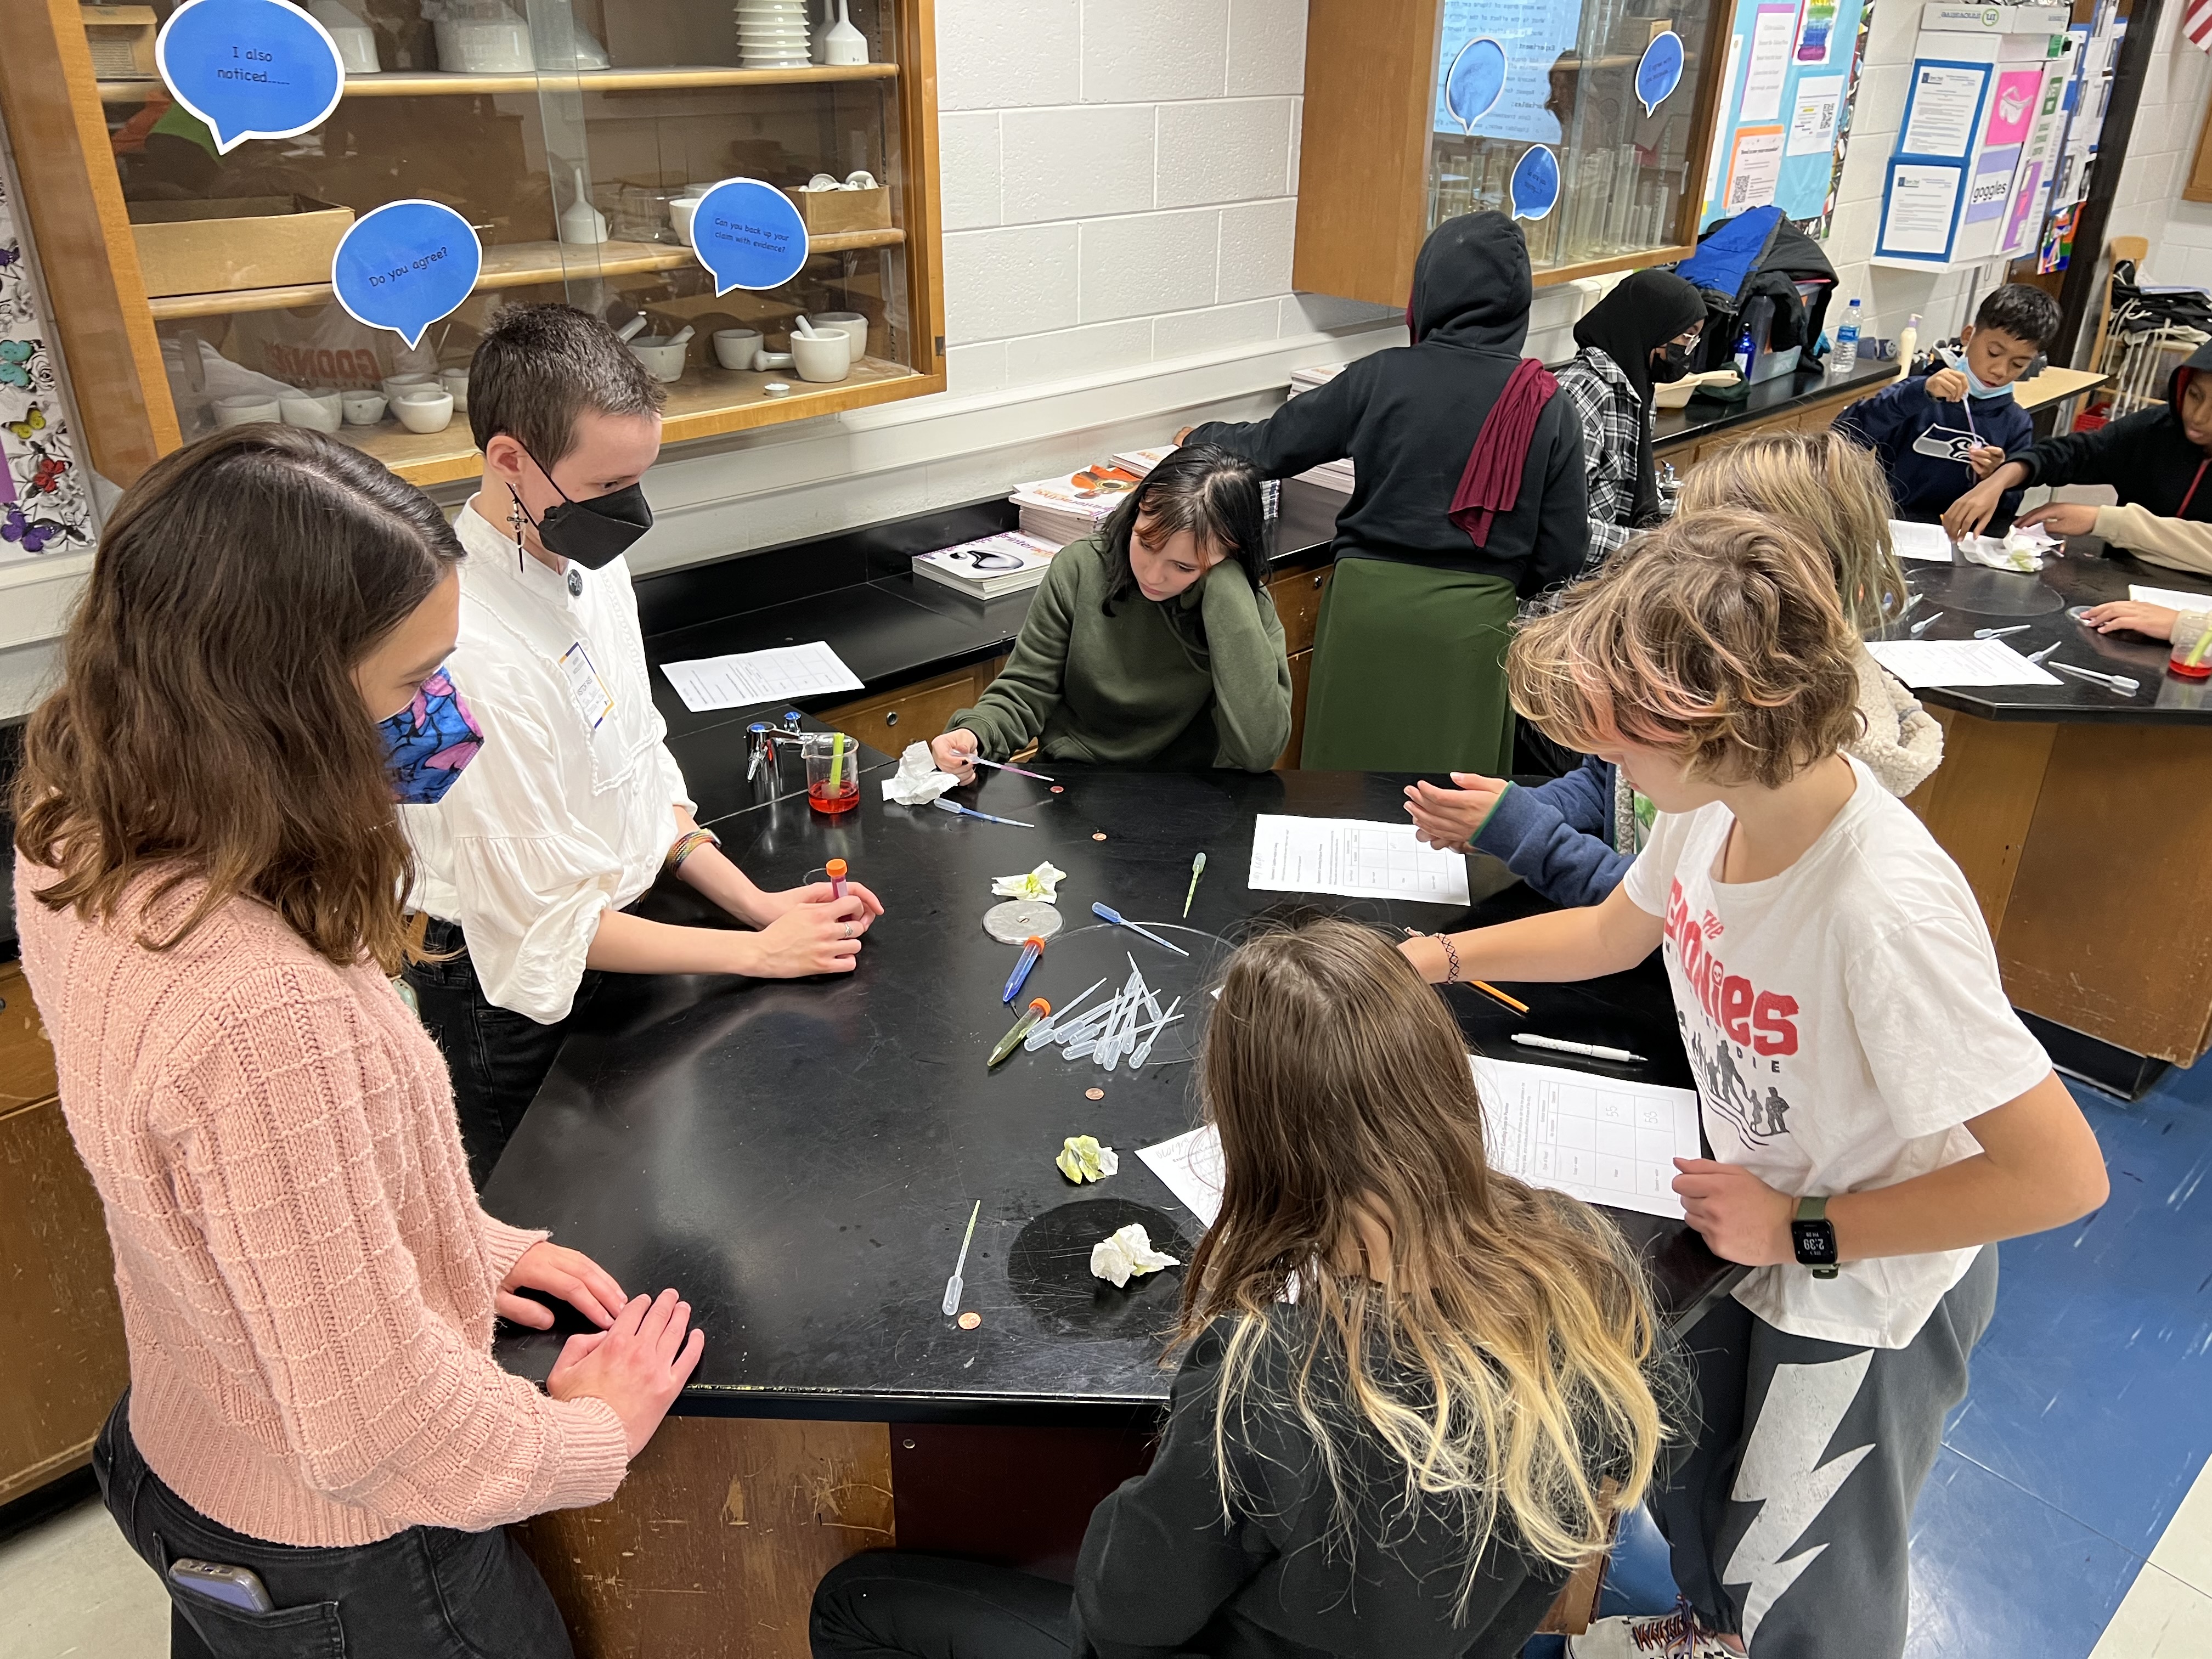 Four students and two SFA volunteers surround a black table with pipettes, centrifuge tubes with differently colored liquids, and worksheets on it. There is also a beaker with red liquid and a celery stalk in it on the table to demonstrate capillary action.  